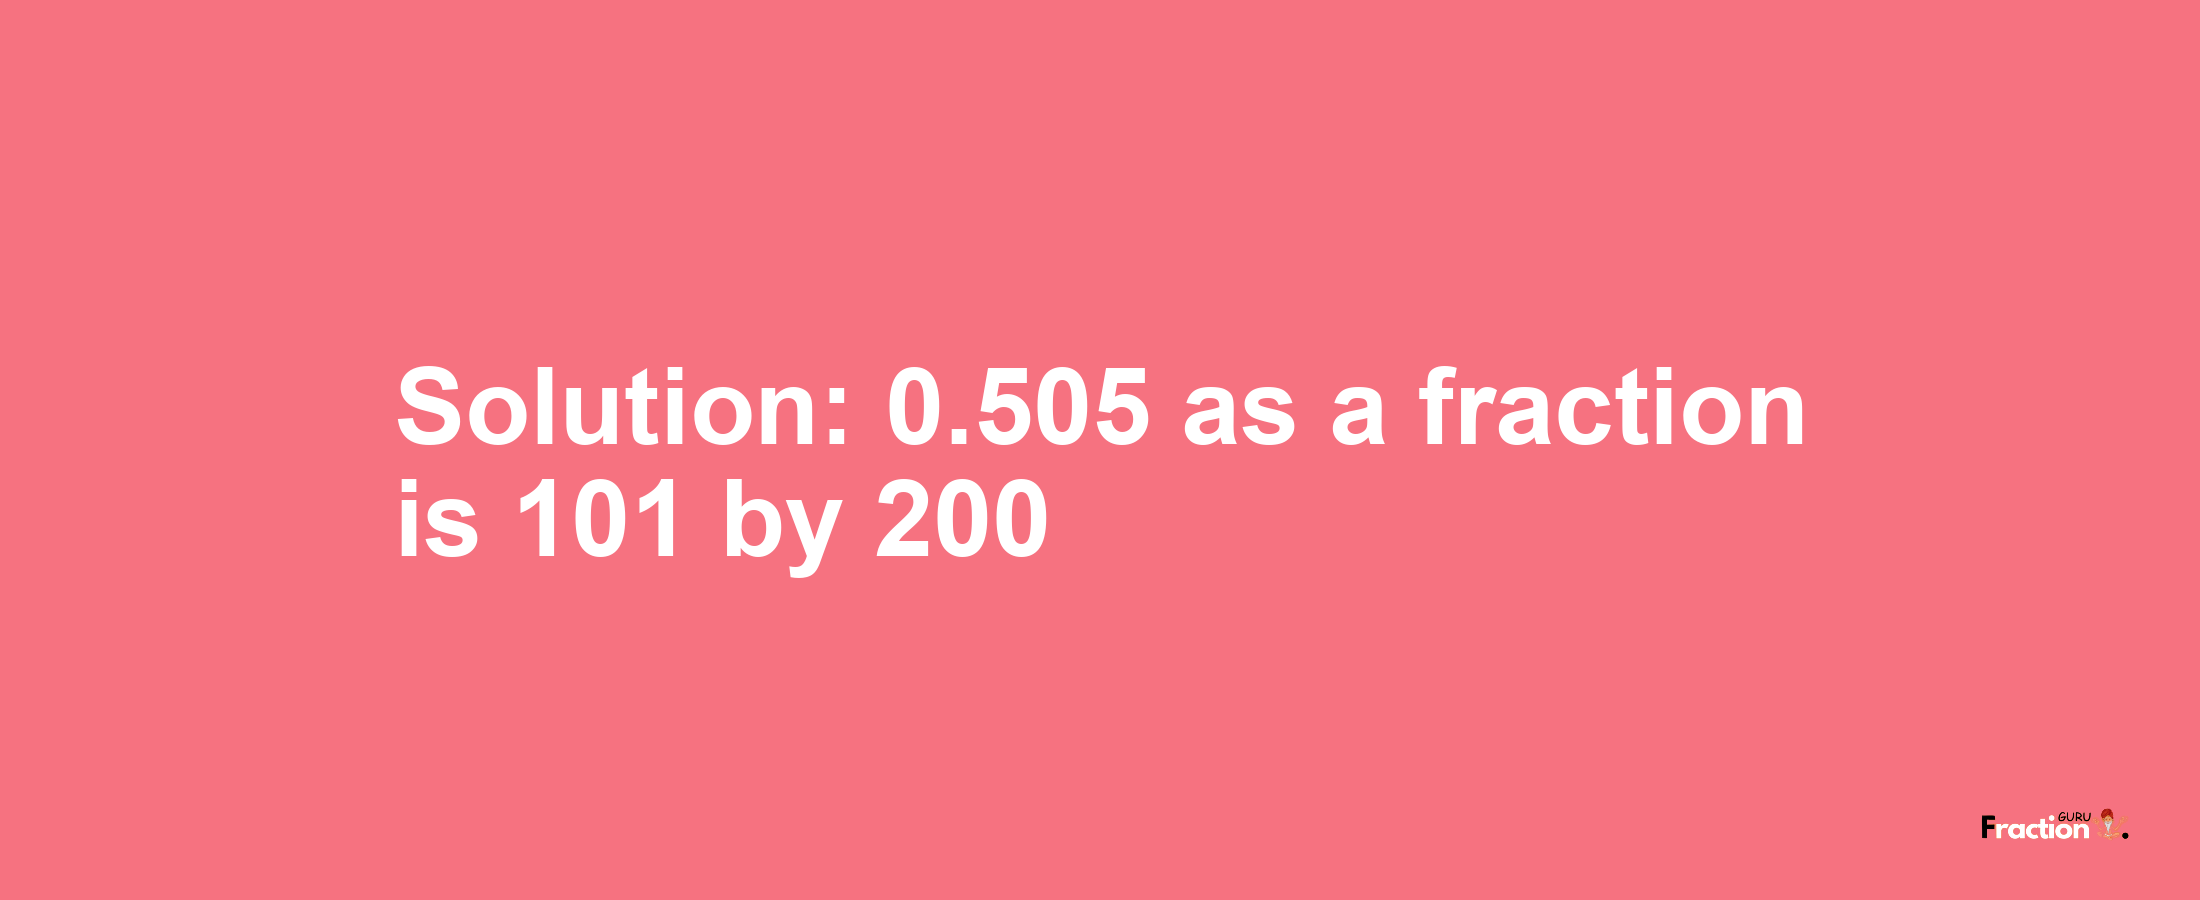 Solution:0.505 as a fraction is 101/200